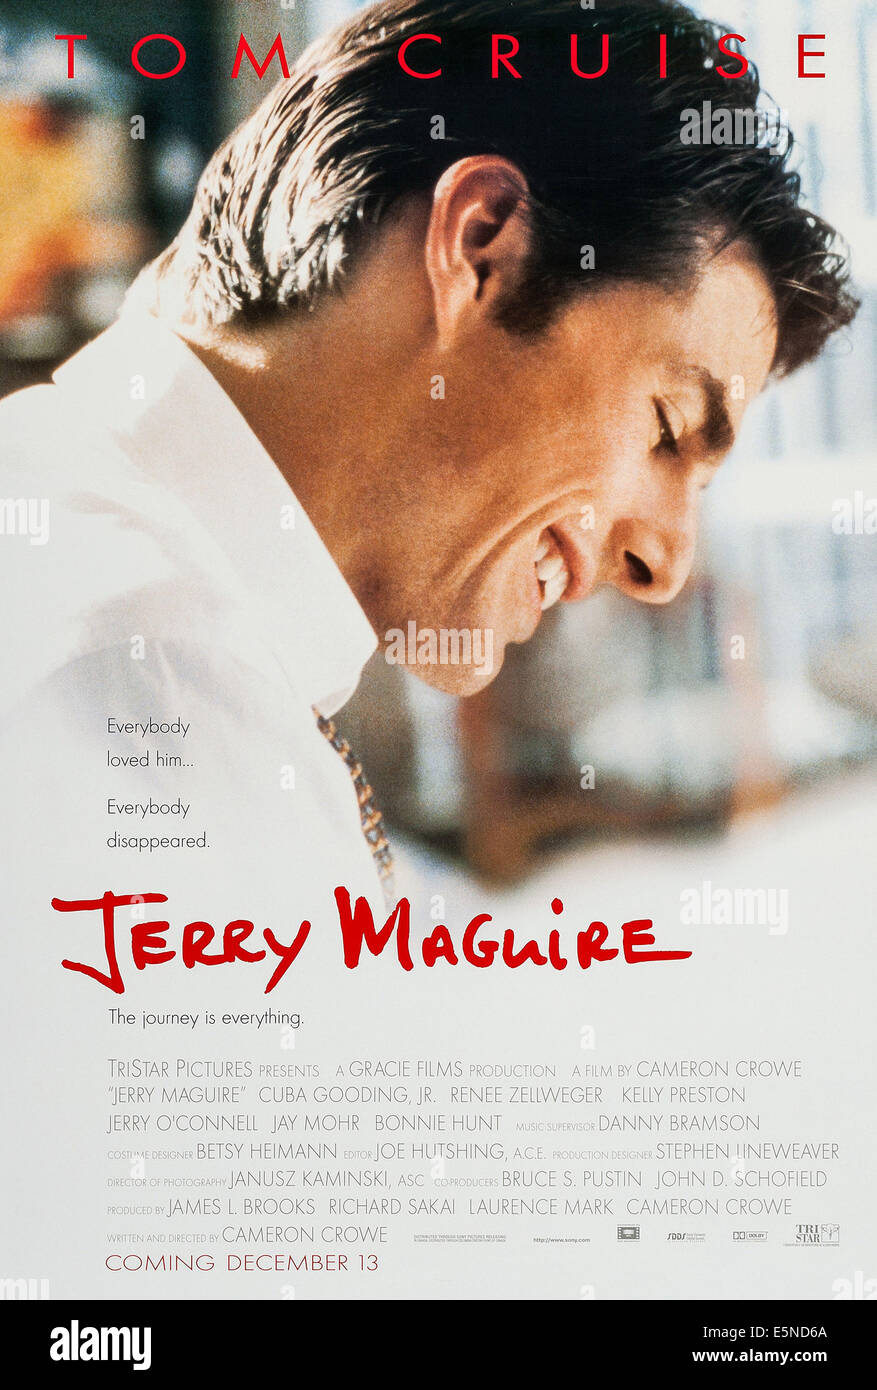 JERRY MAGUIRE, US poster art, Tom Cruise, 1996. ©TriStar Pictures/ Courtesy: Everett Collection. Stock Photo